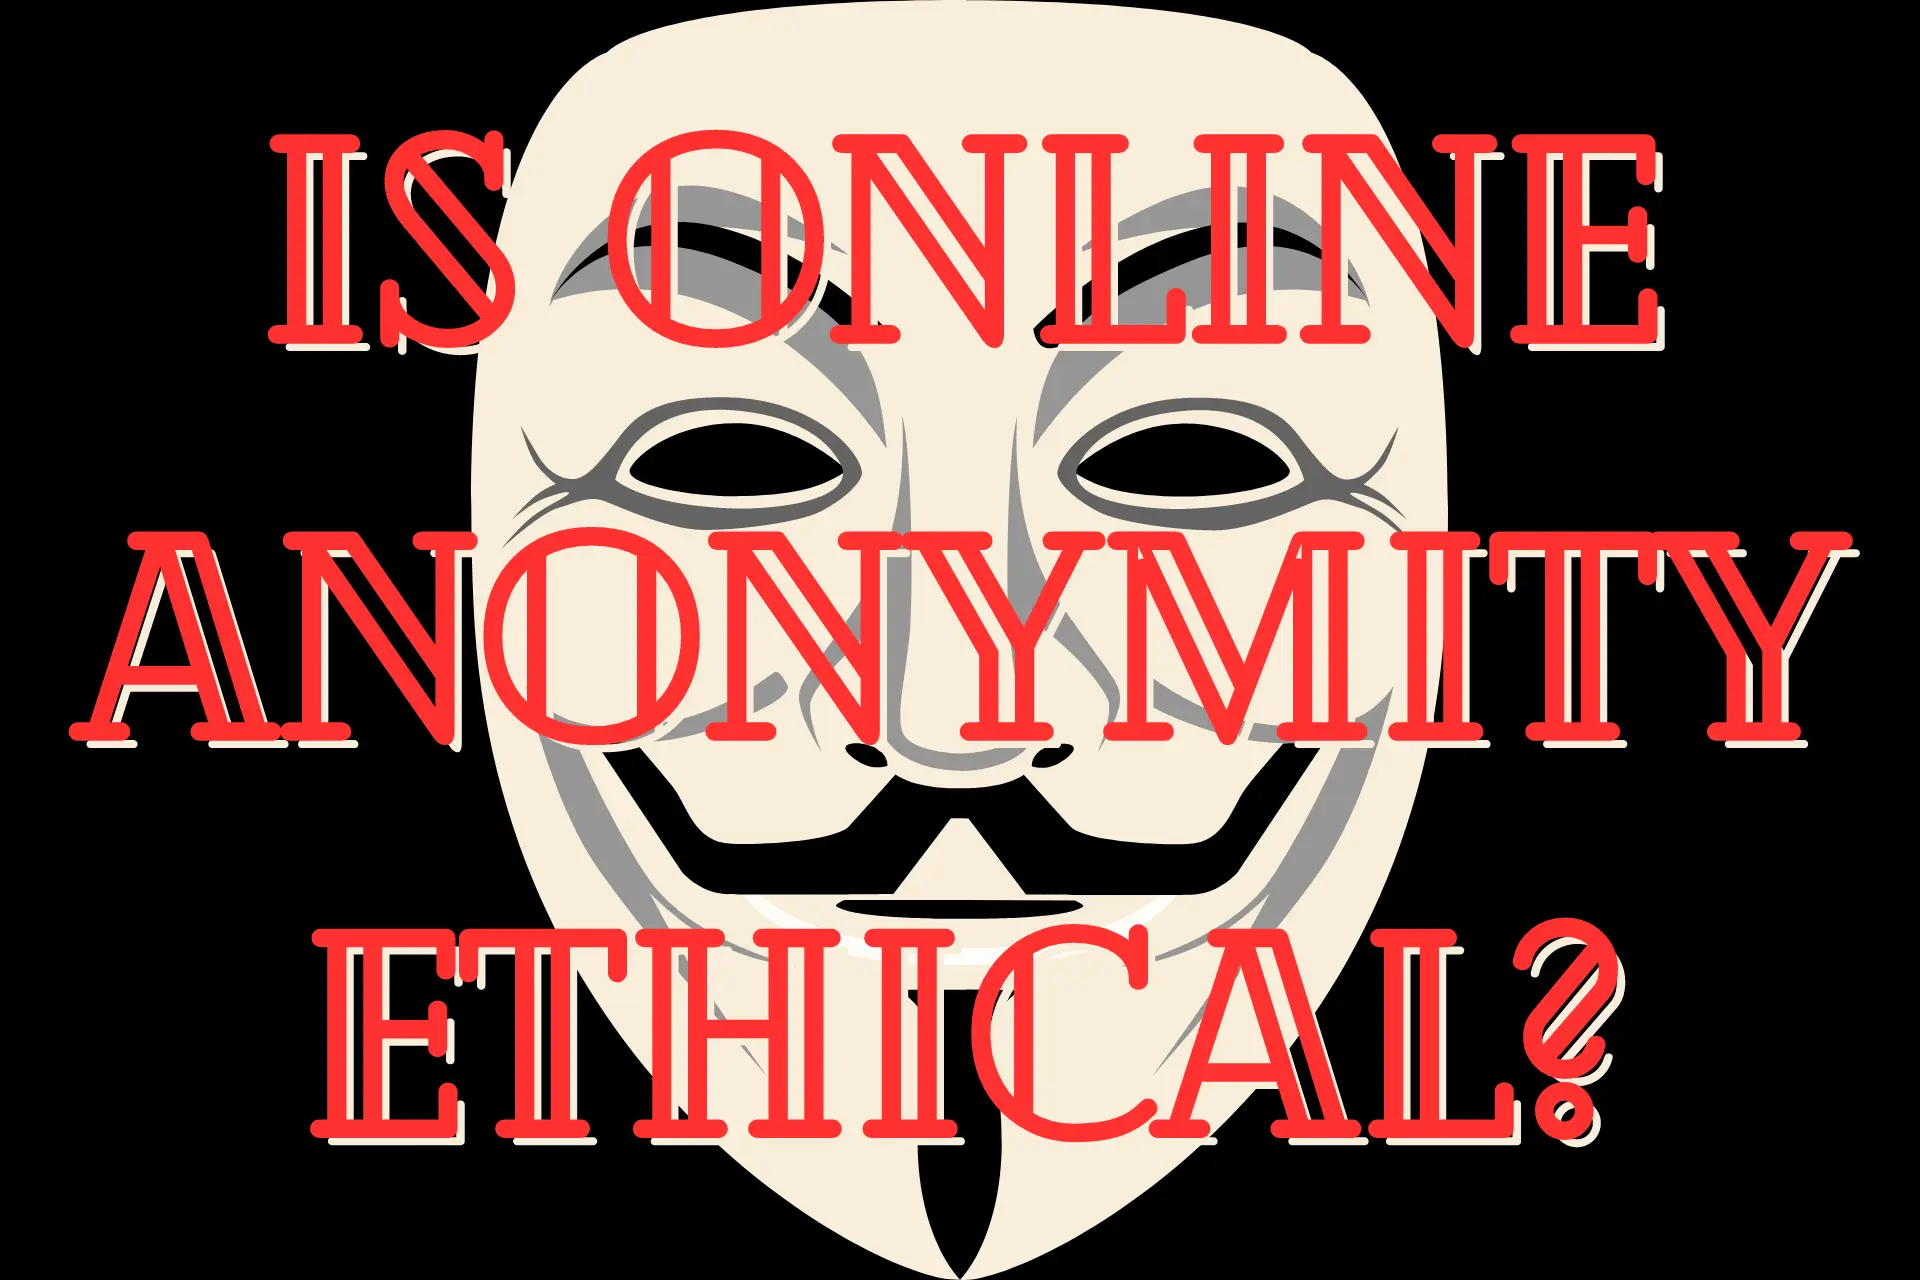 Is online anonymity ethical?